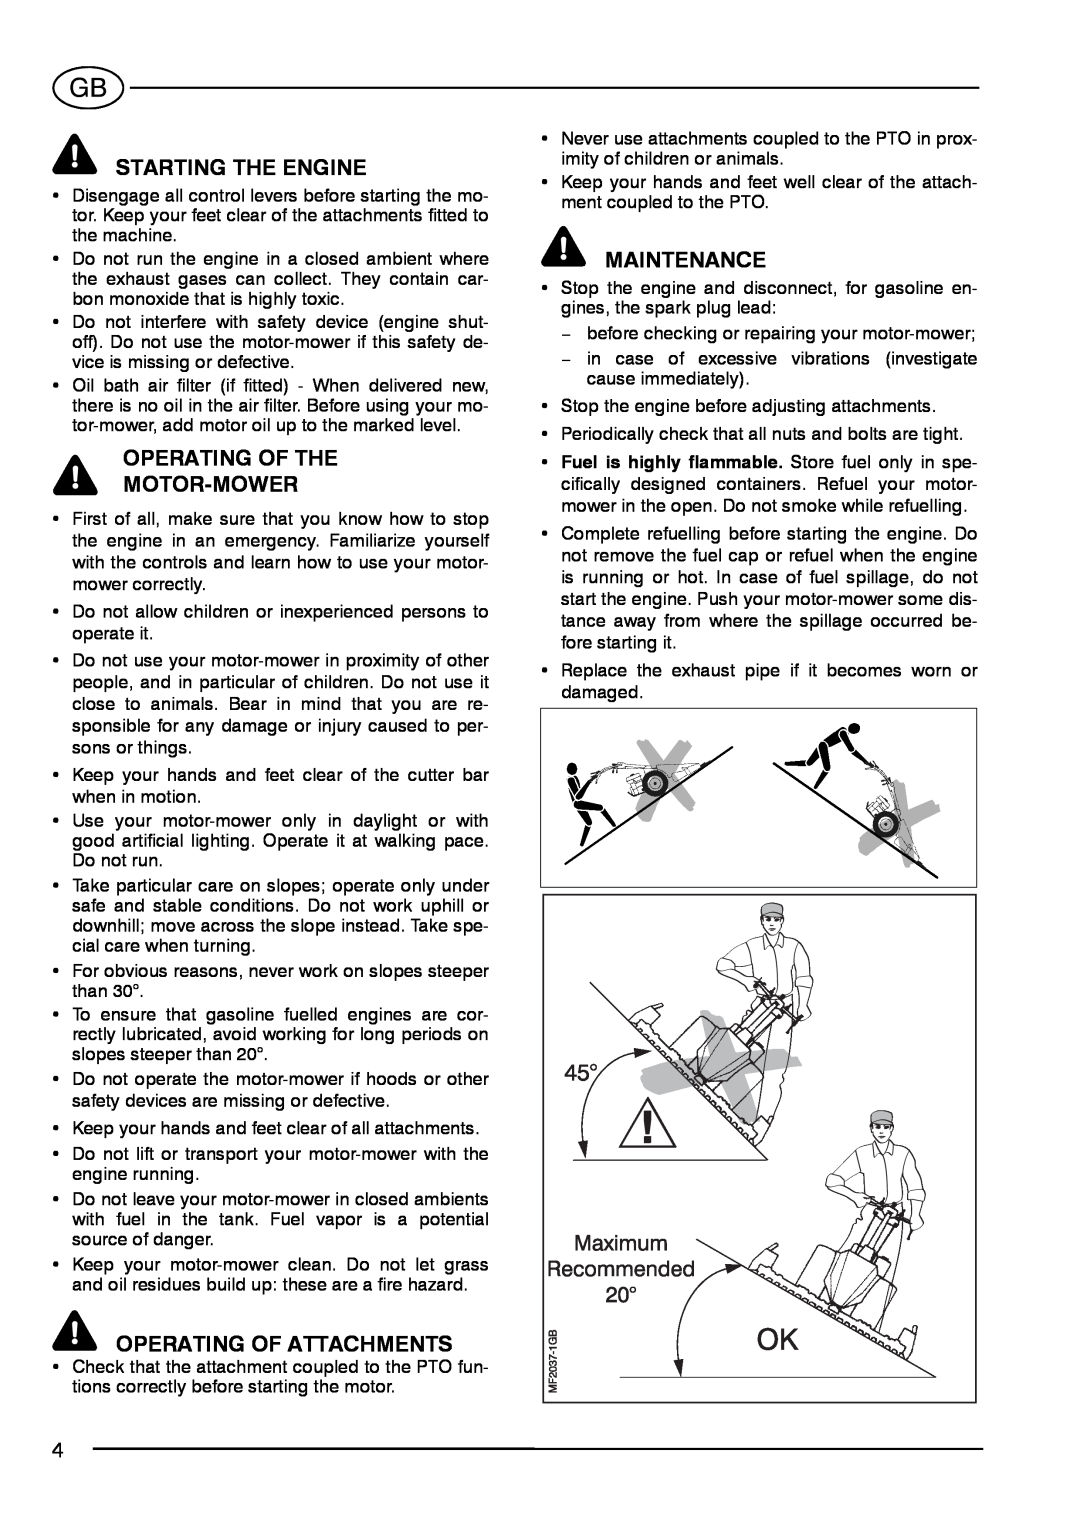 S.E.P BC90(1+1) manual Starting The Engine, Operating Of The Motor-Mower, Operating Of Attachments, Maintenance 